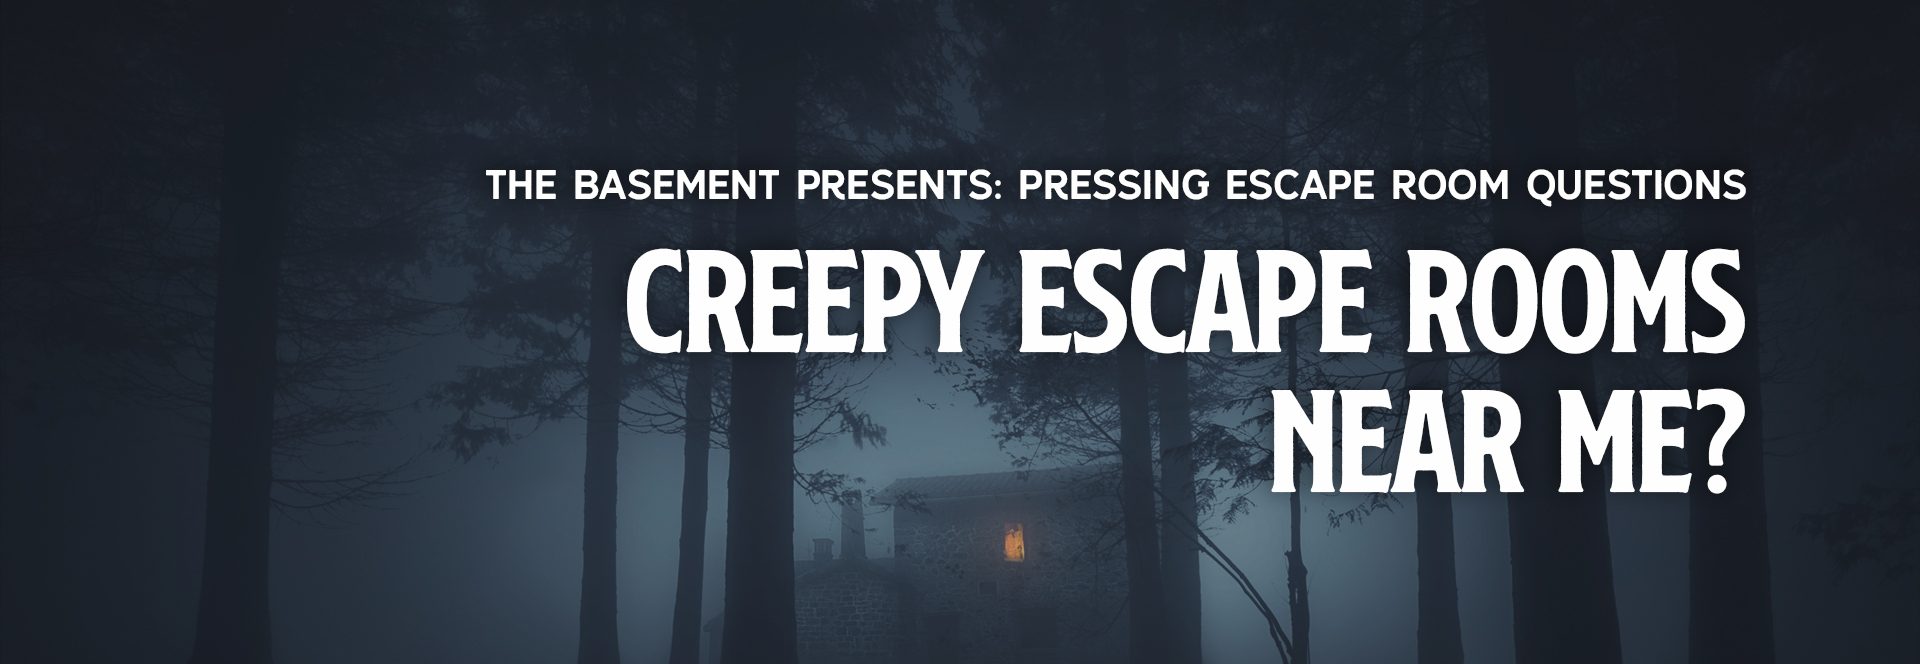 Looking For Creepy Escape Rooms Near Me?